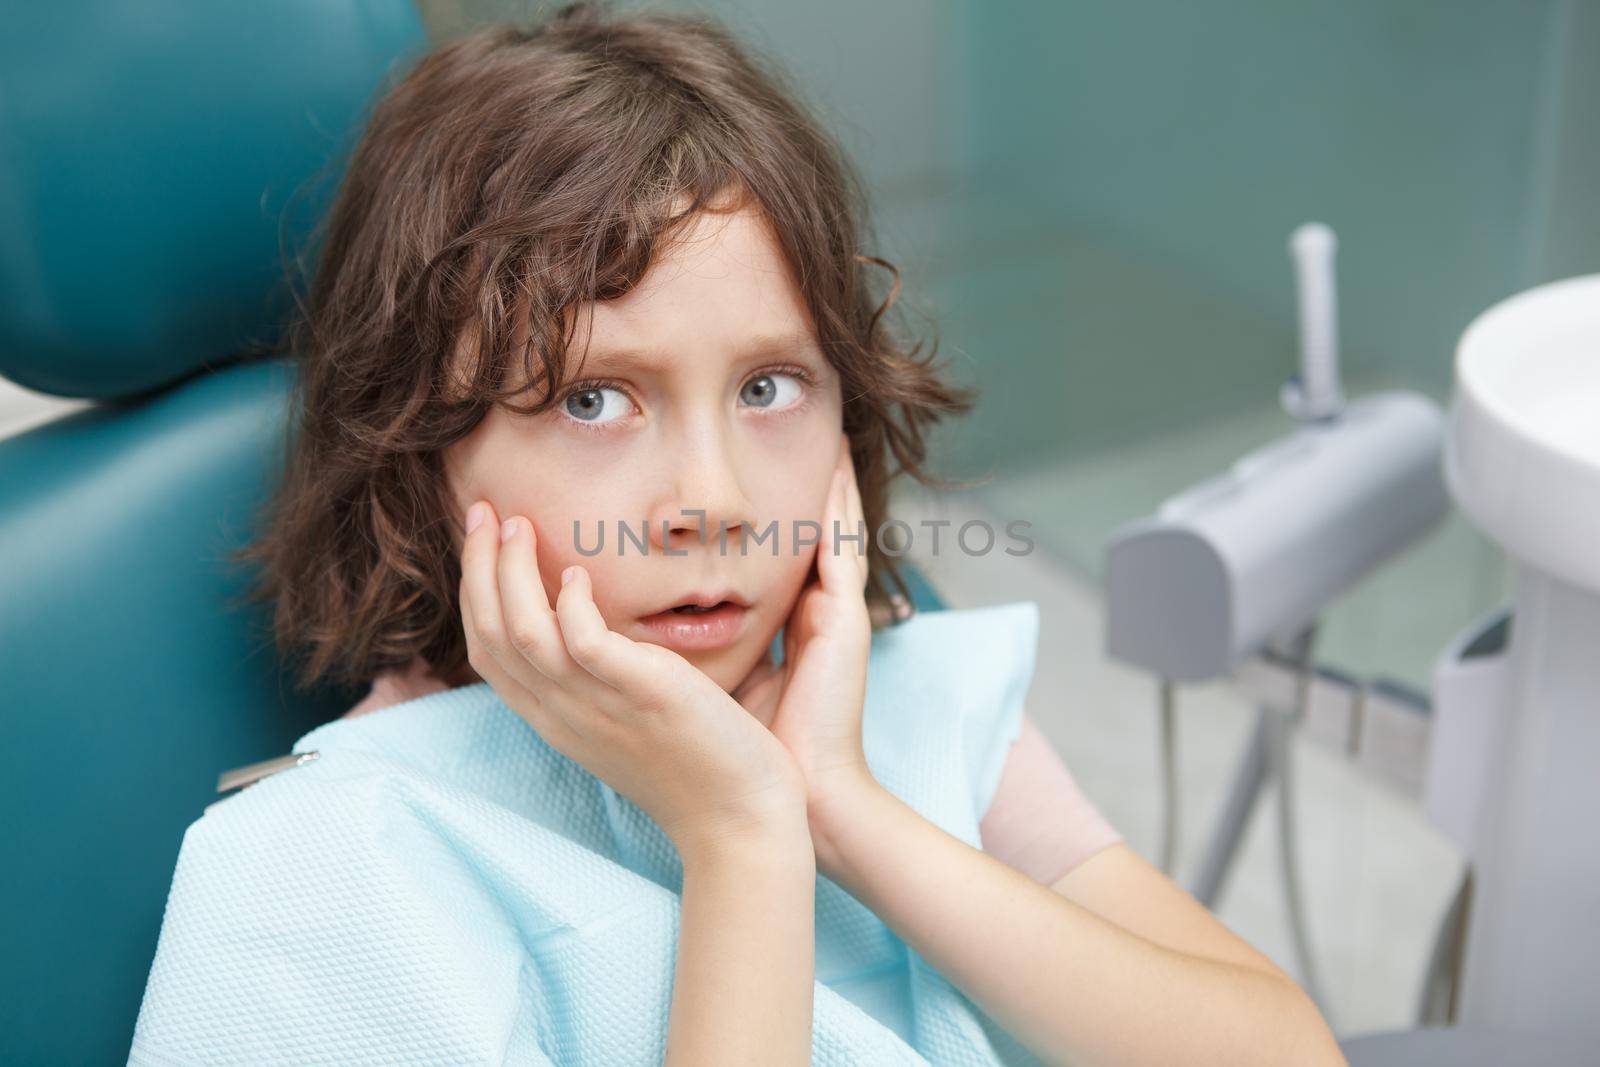 Young boy getting dental treatment by MAD_Production